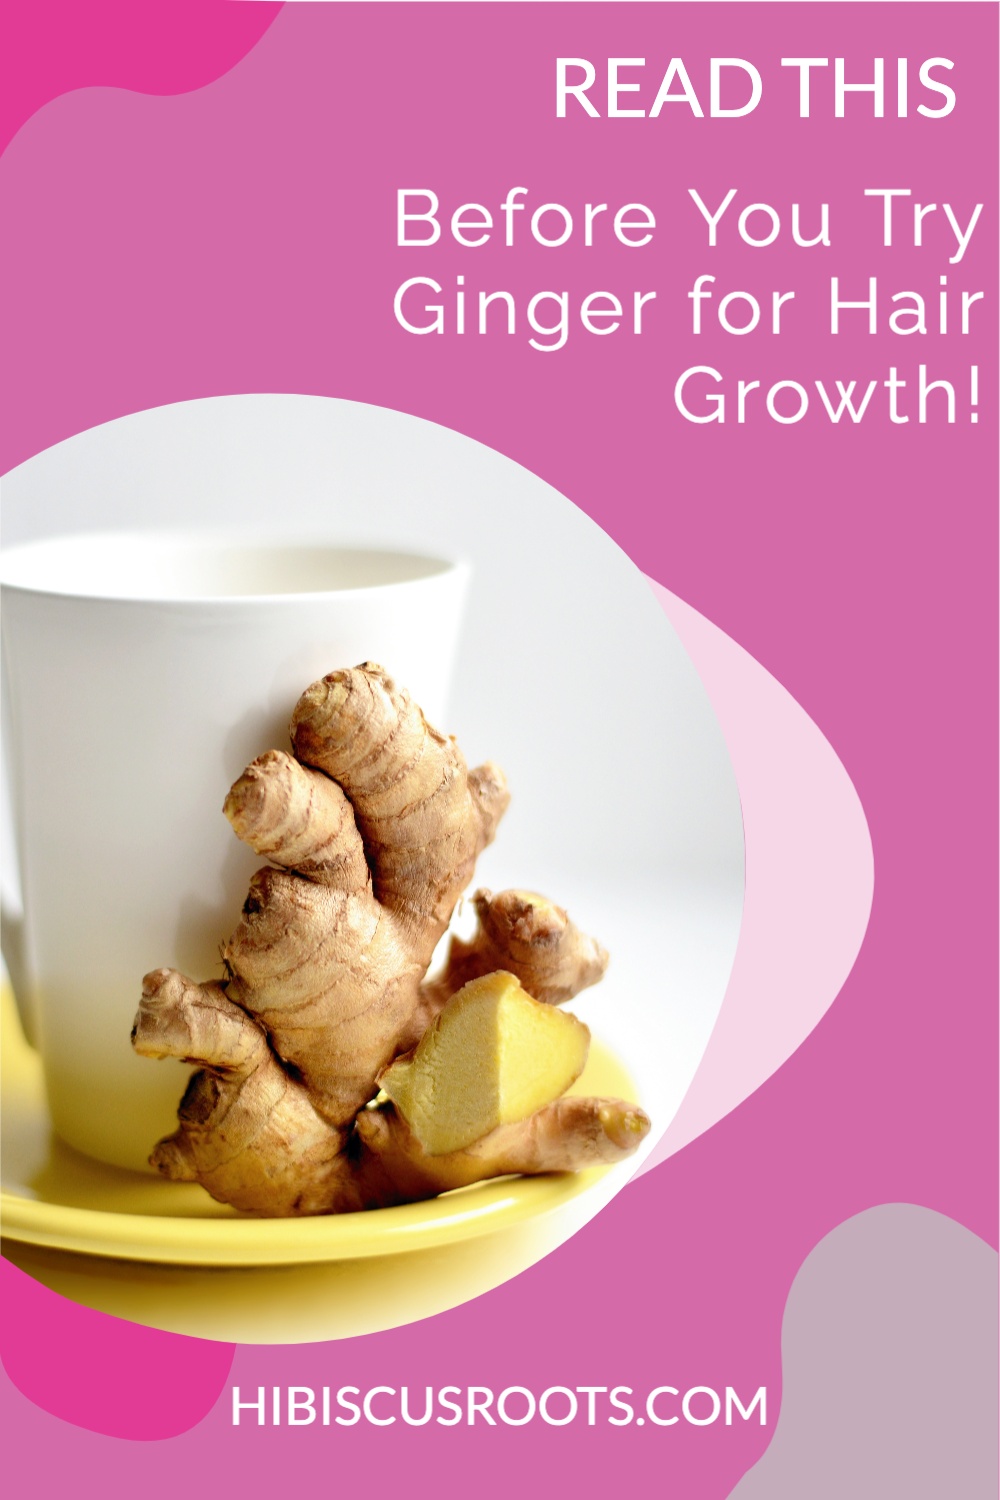 READ THIS Before You Try Ginger for Natural Hair Growth!